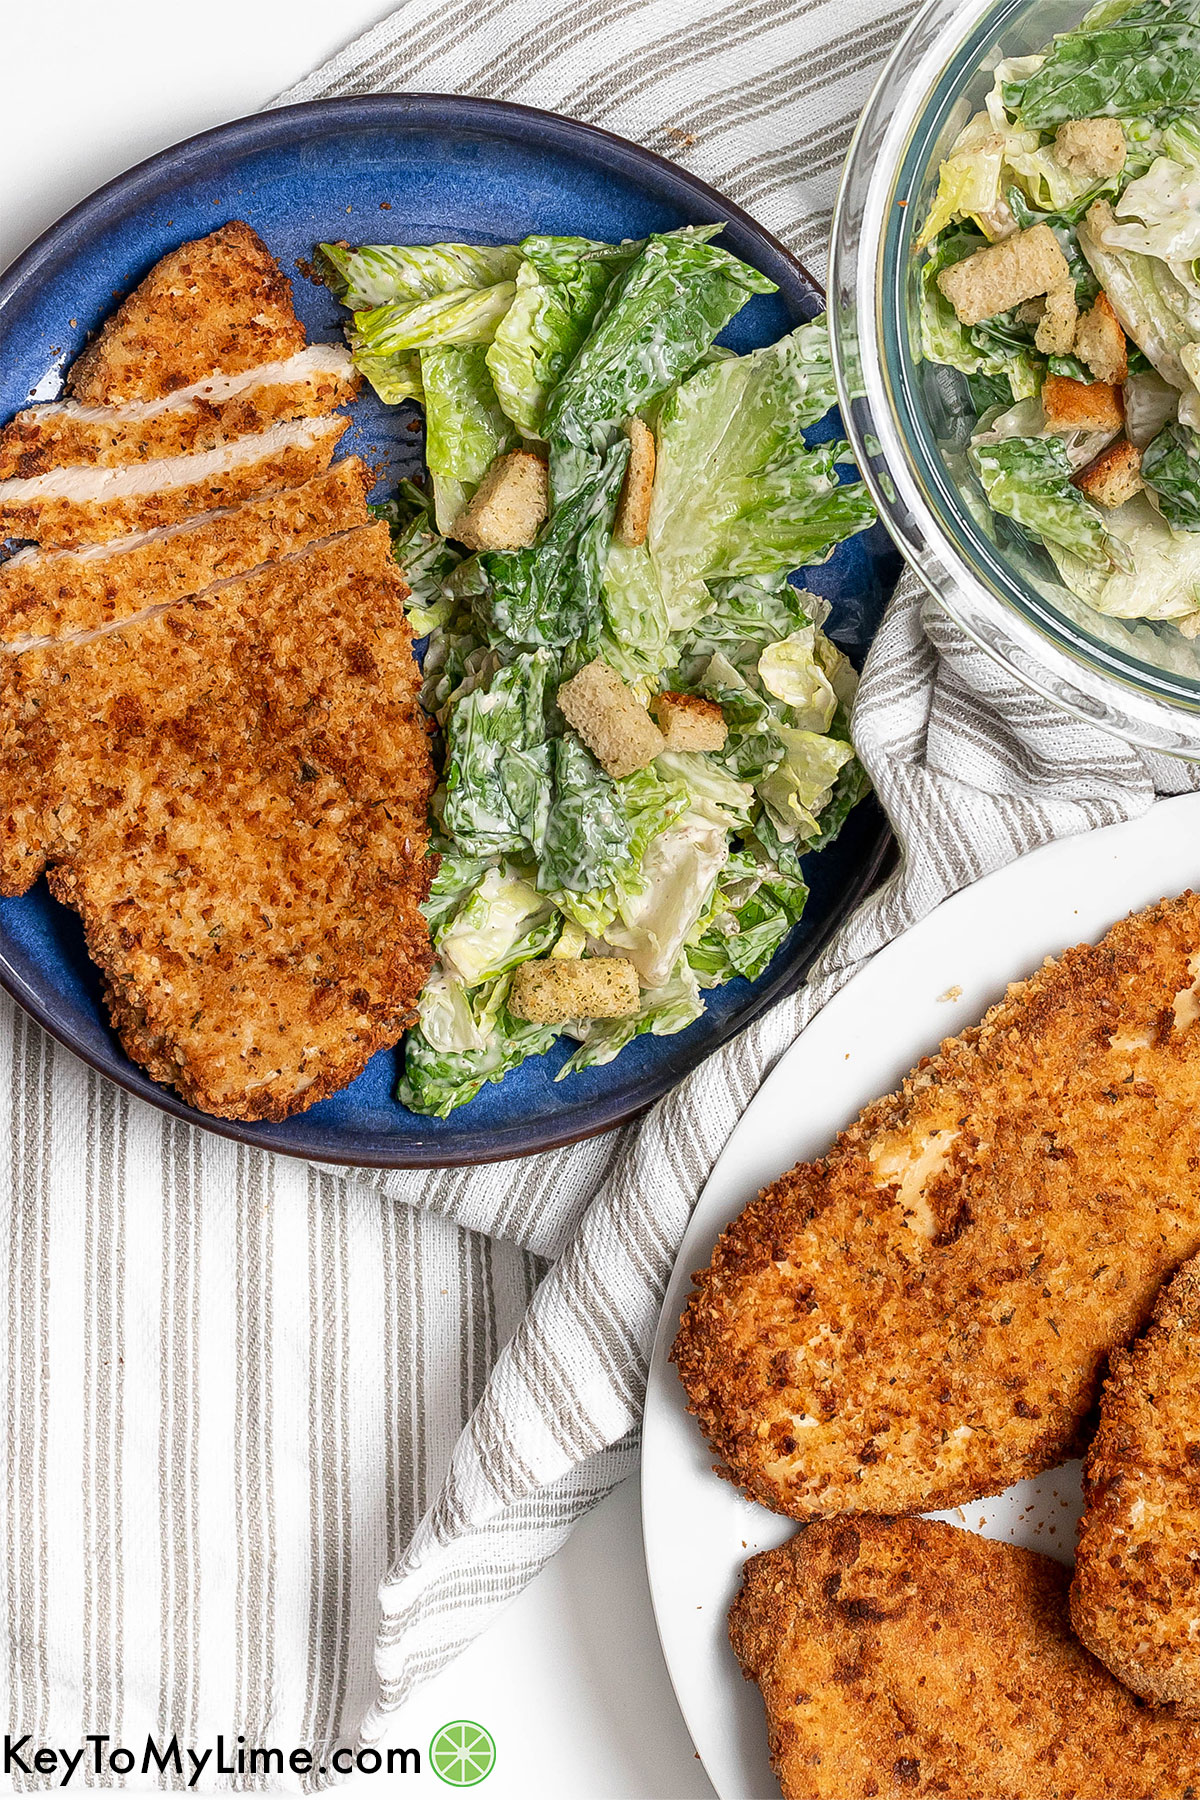 A juicy sliced chicken cutlet plated with a salad to the side with the remaining cutlets on another plate.